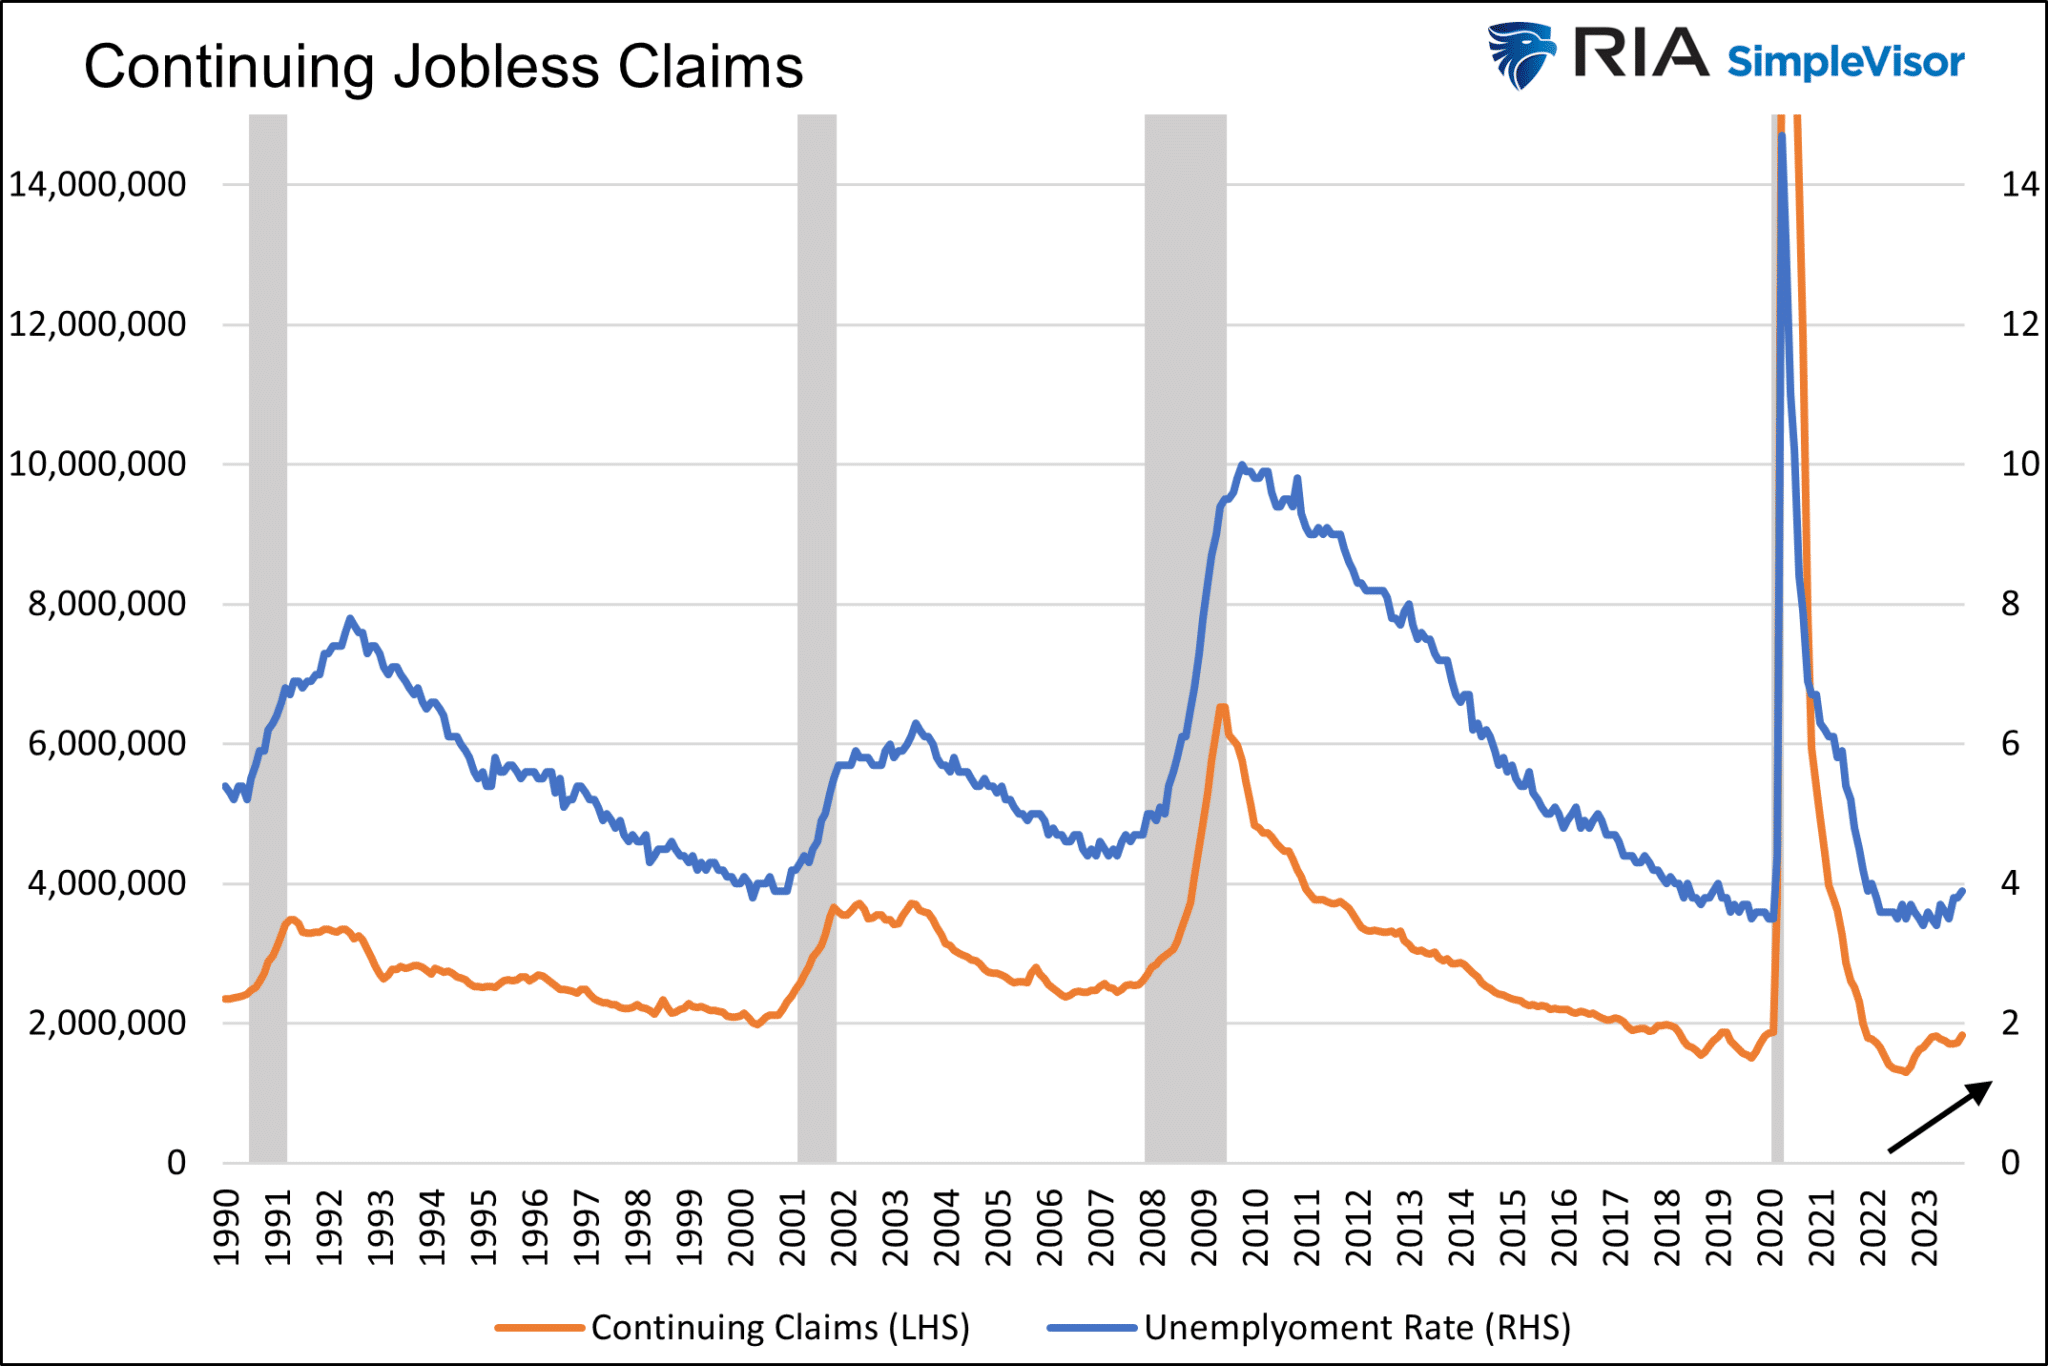 Continuing Jobless Claims